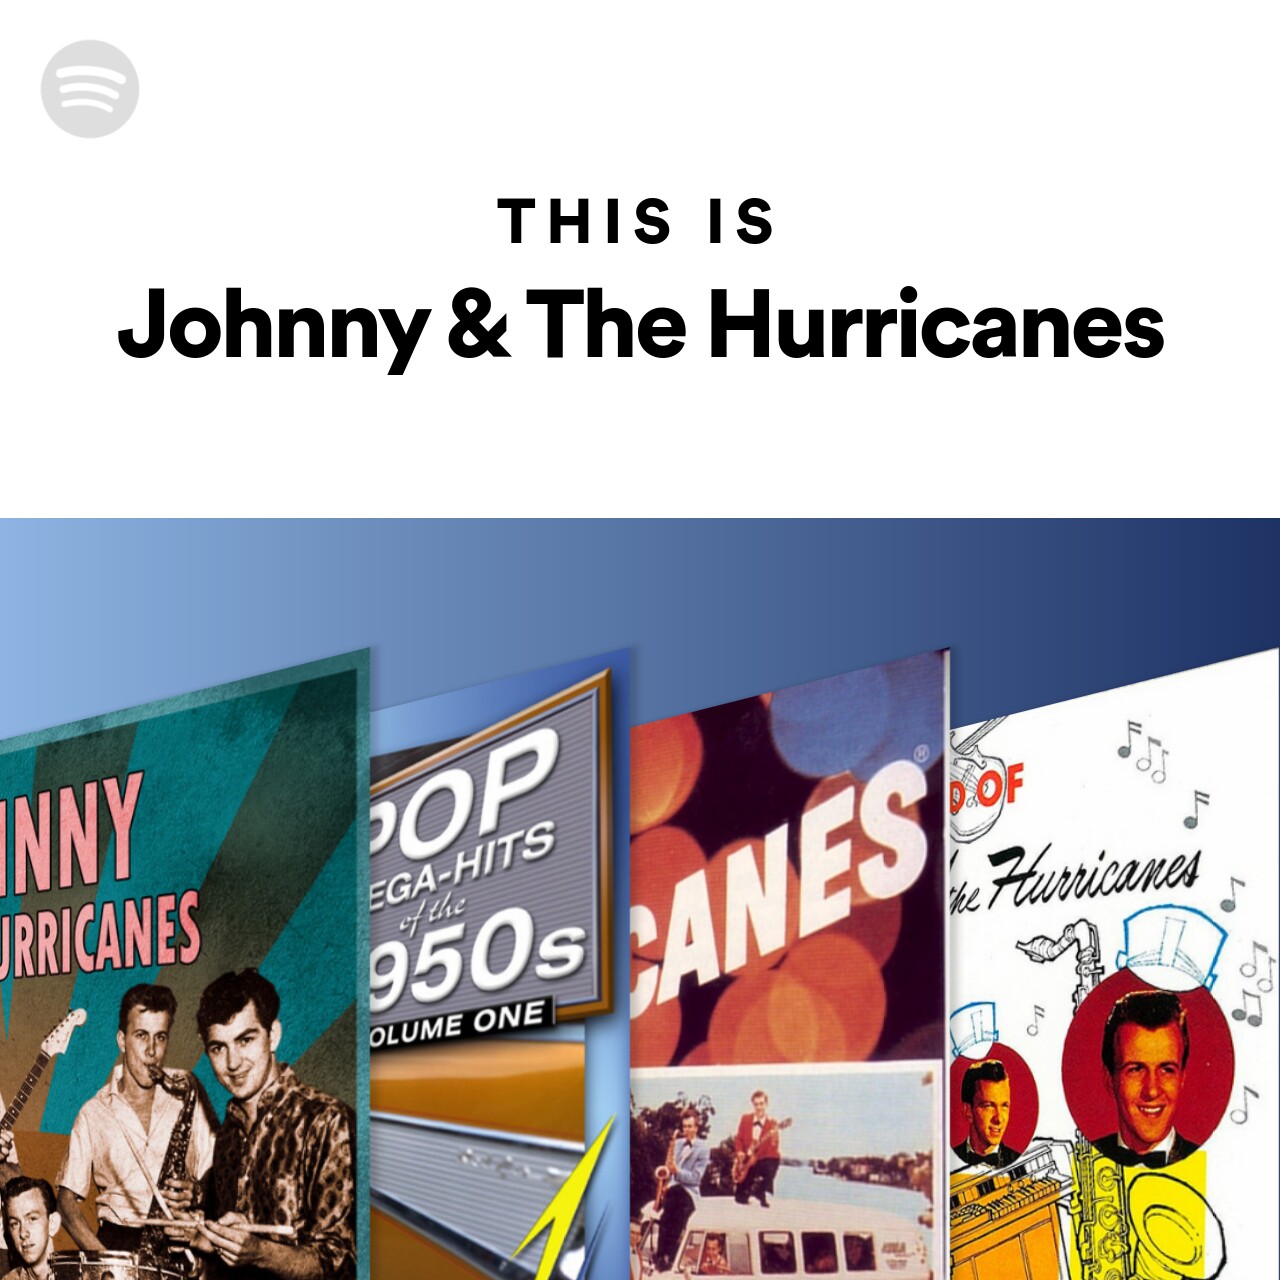 This Is Johnny & The Hurricanes